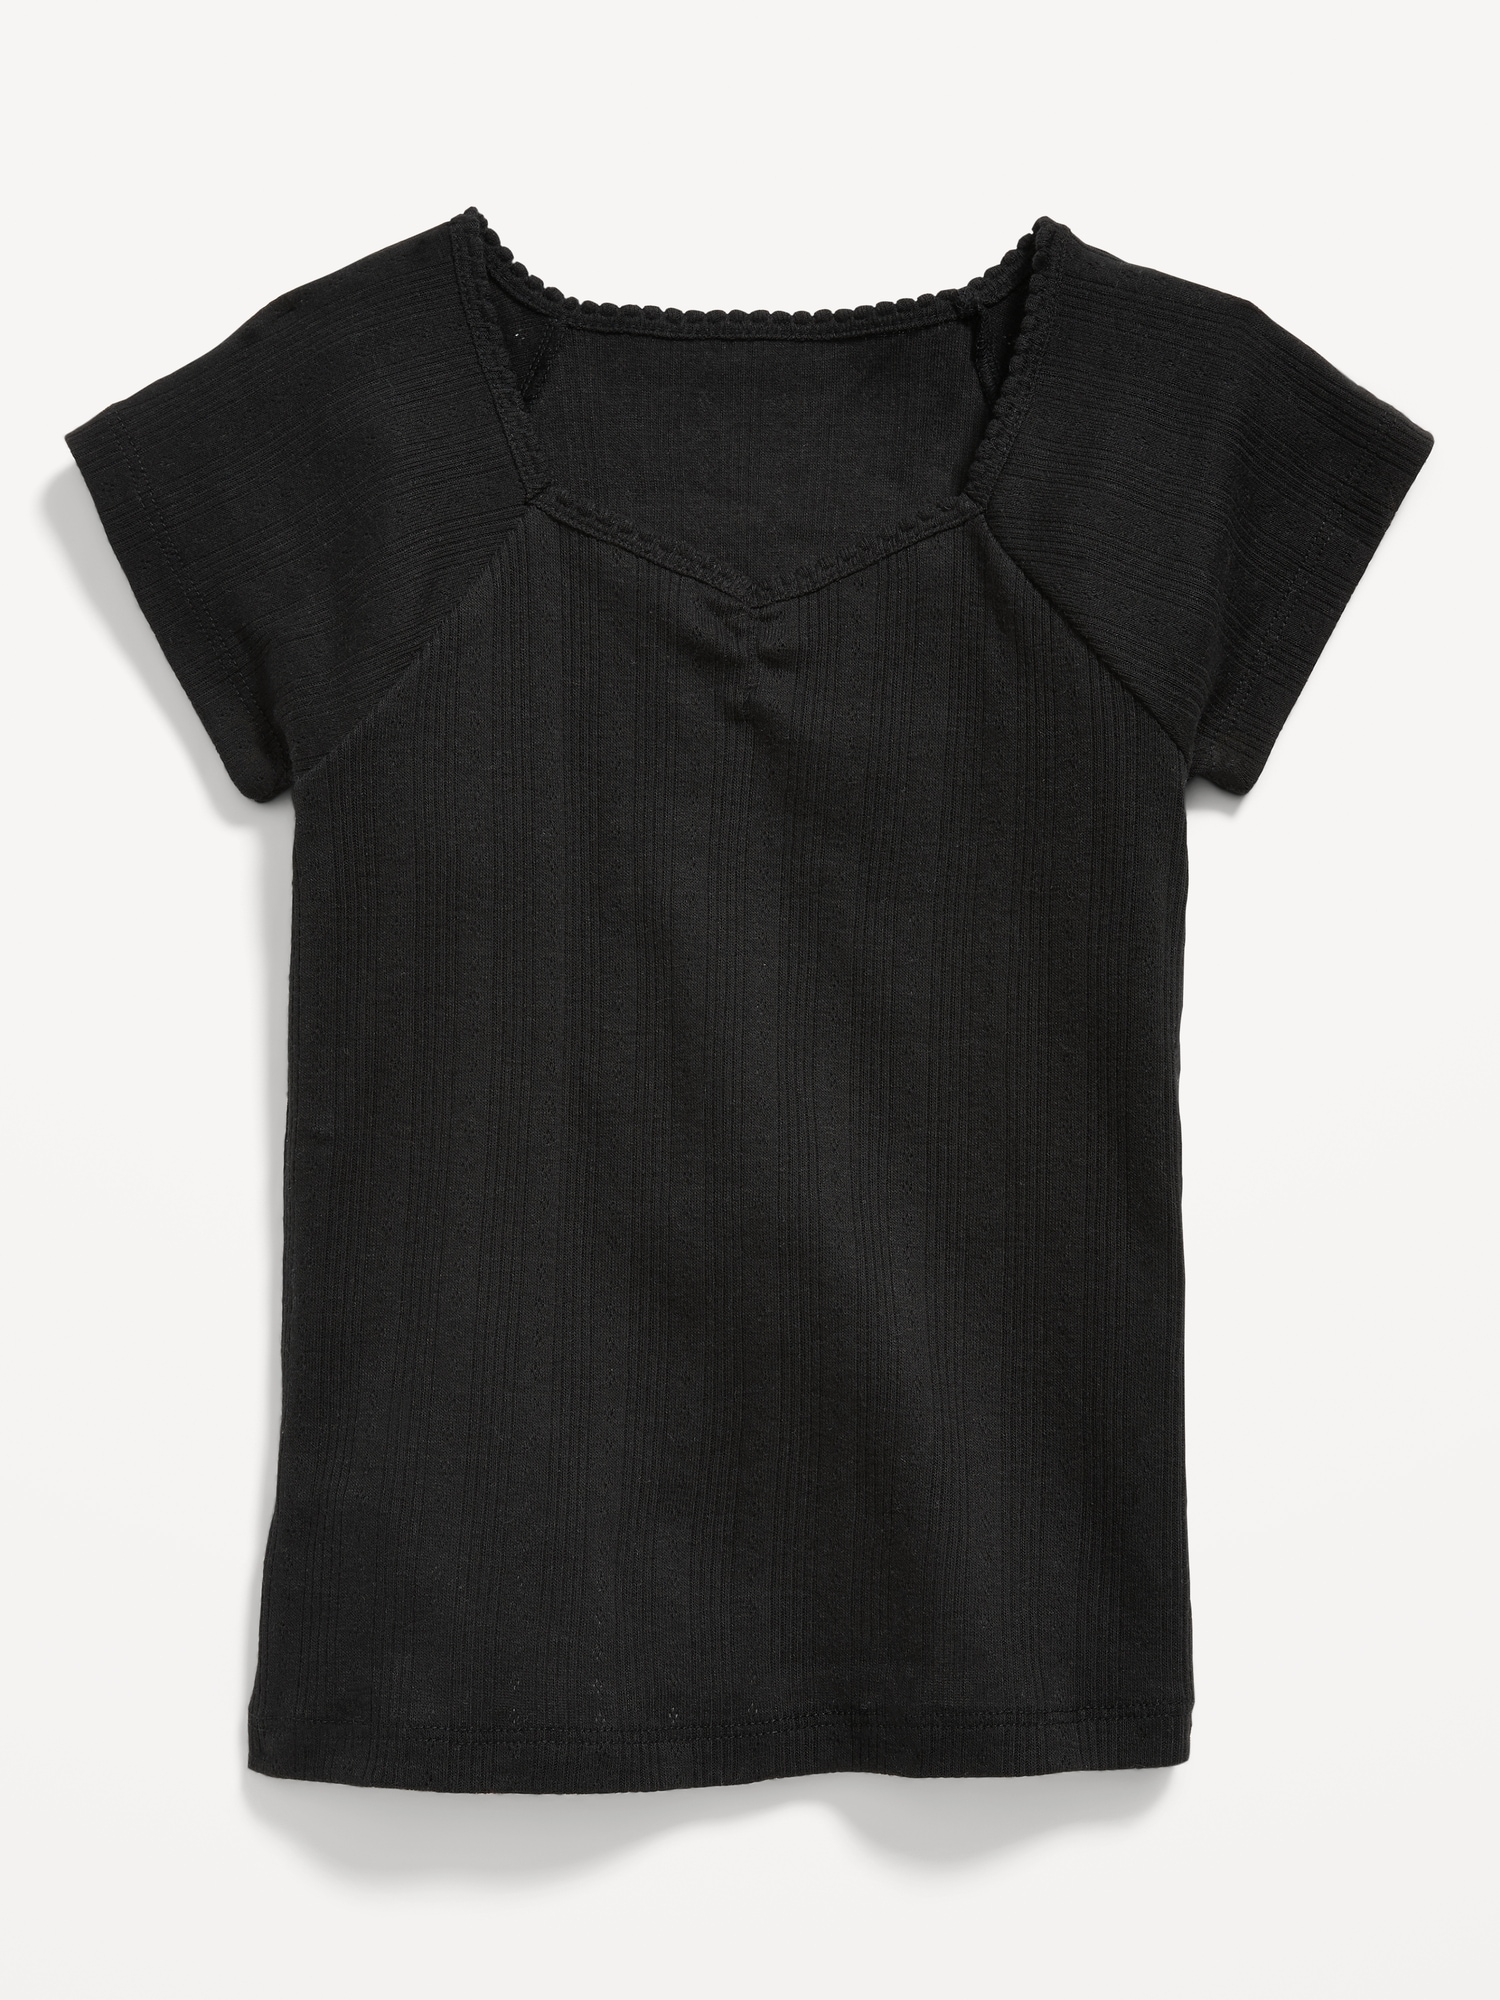 Short-Sleeve Pointelle-Knit Cinched Top for Girls